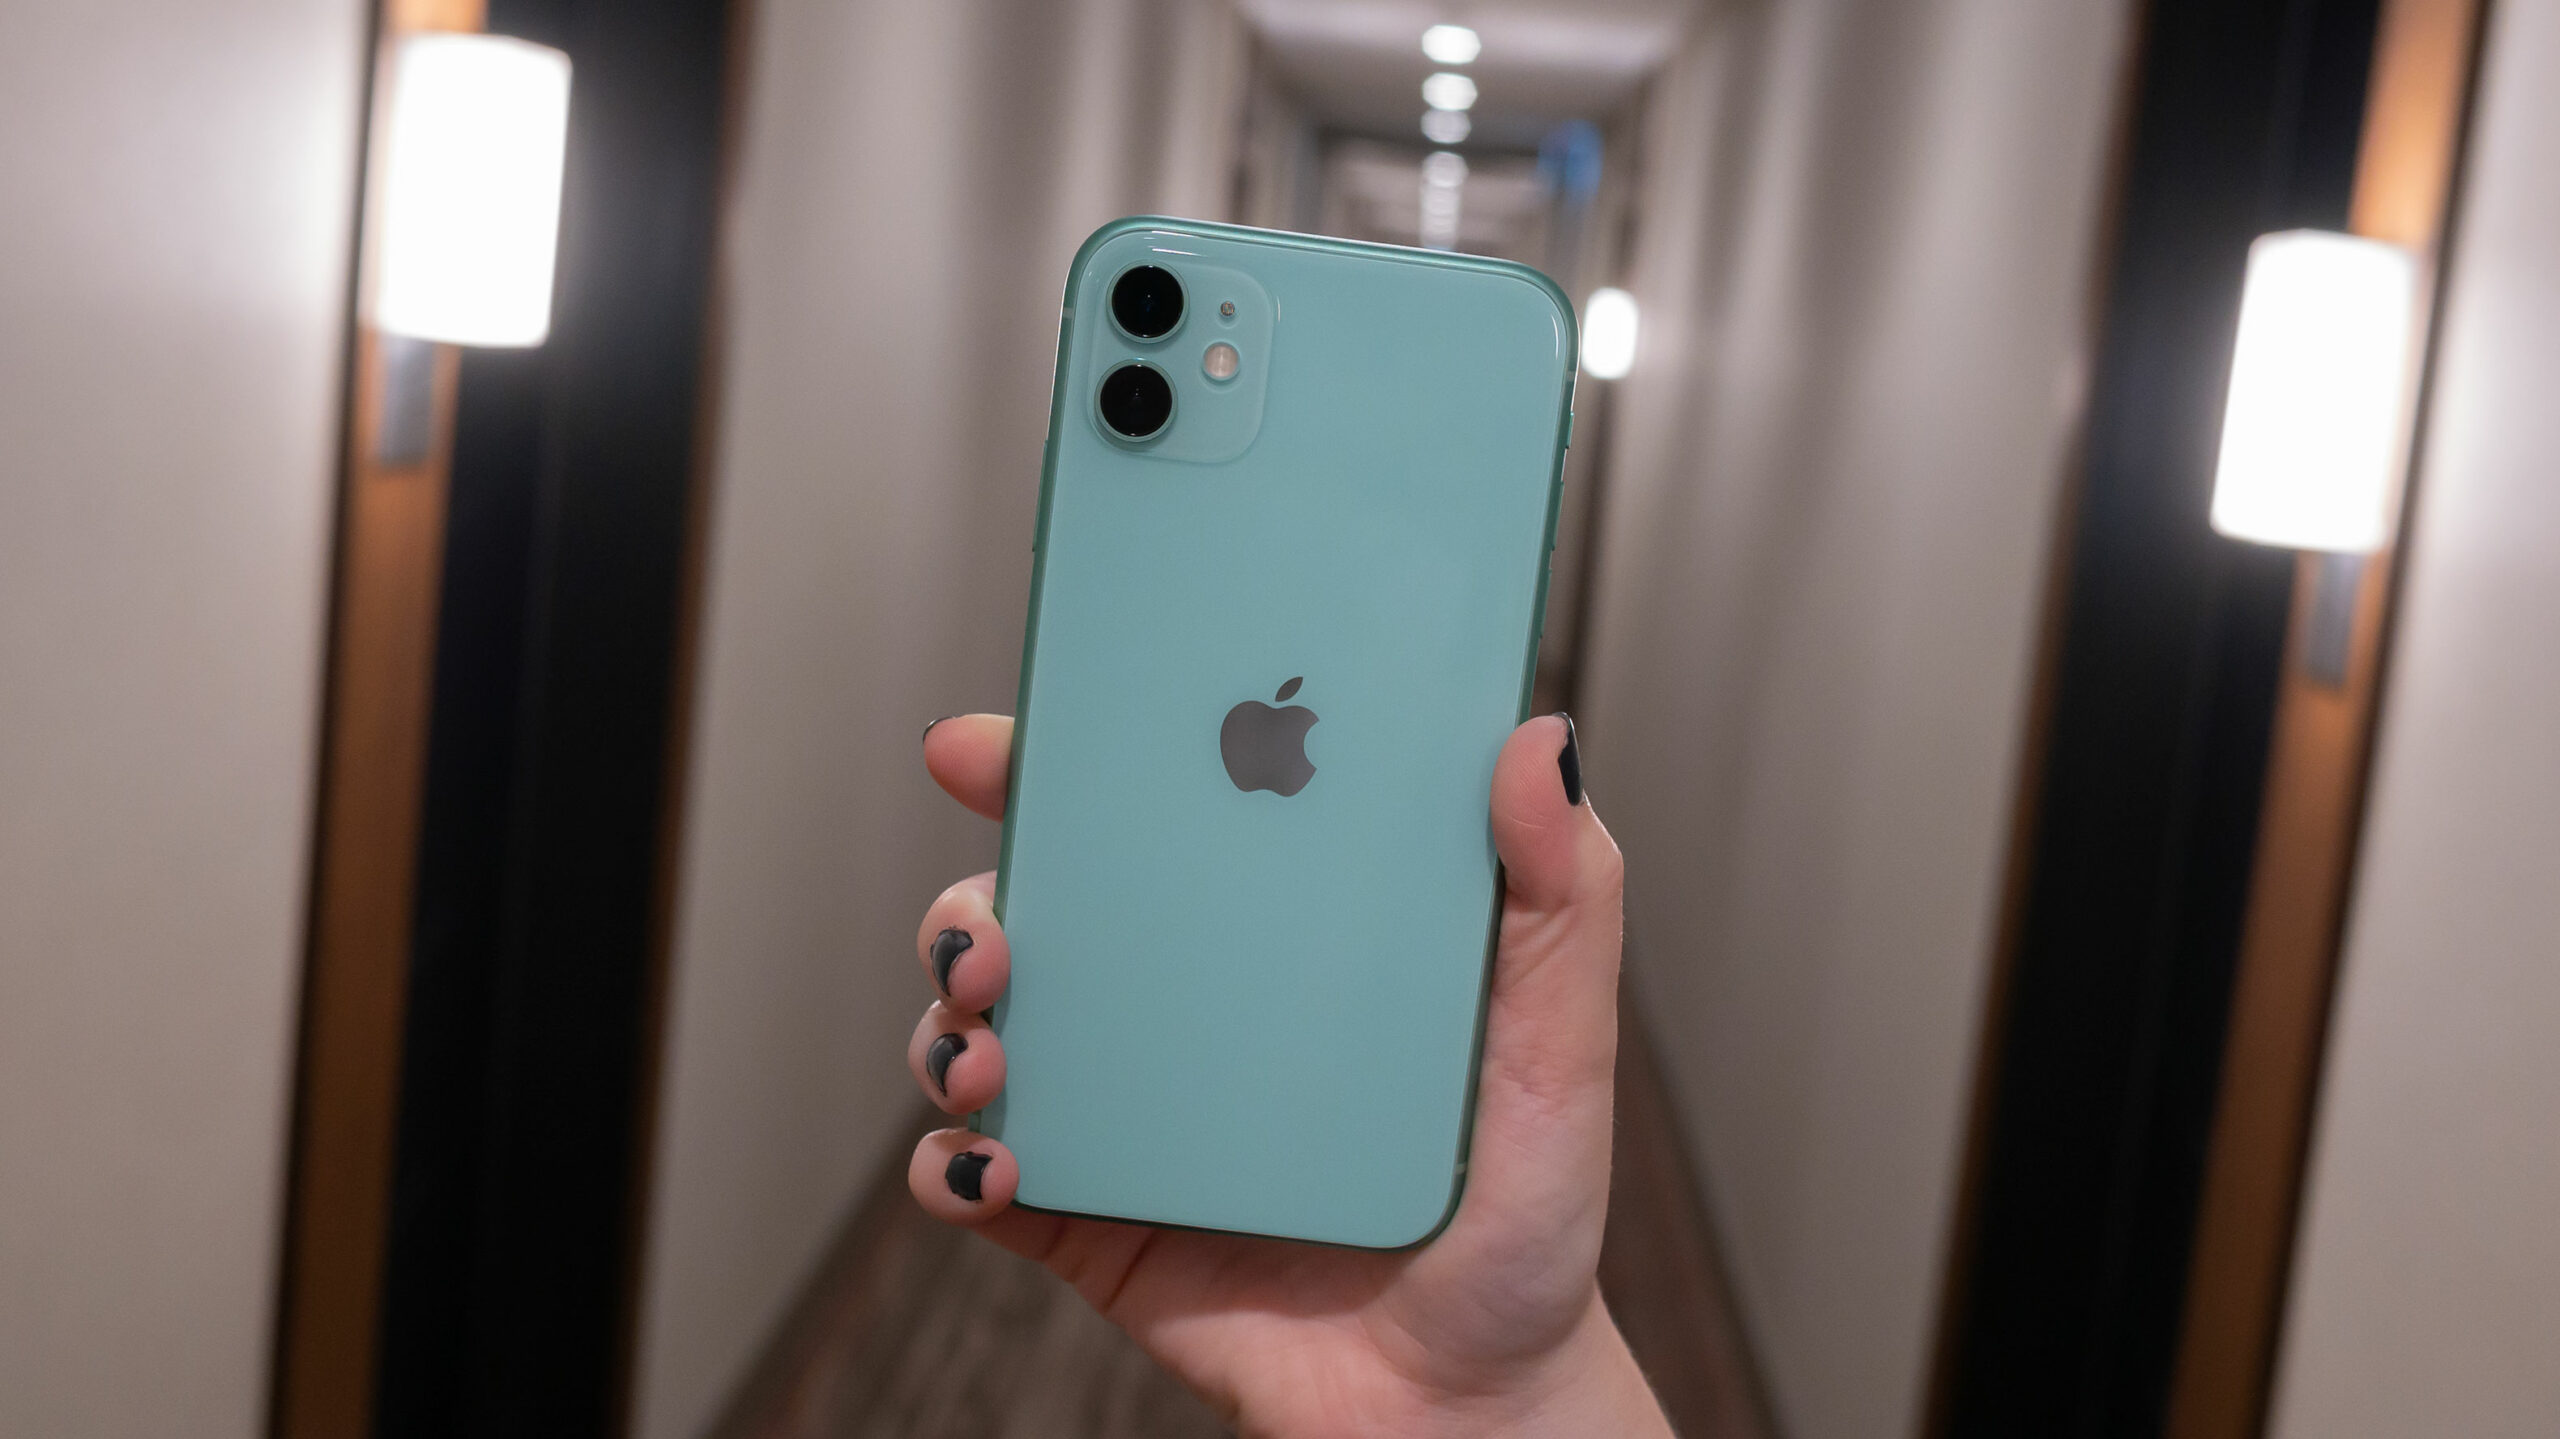 Apple Rolls Out Fix For Iphone 11 Green Screen Tint Issue